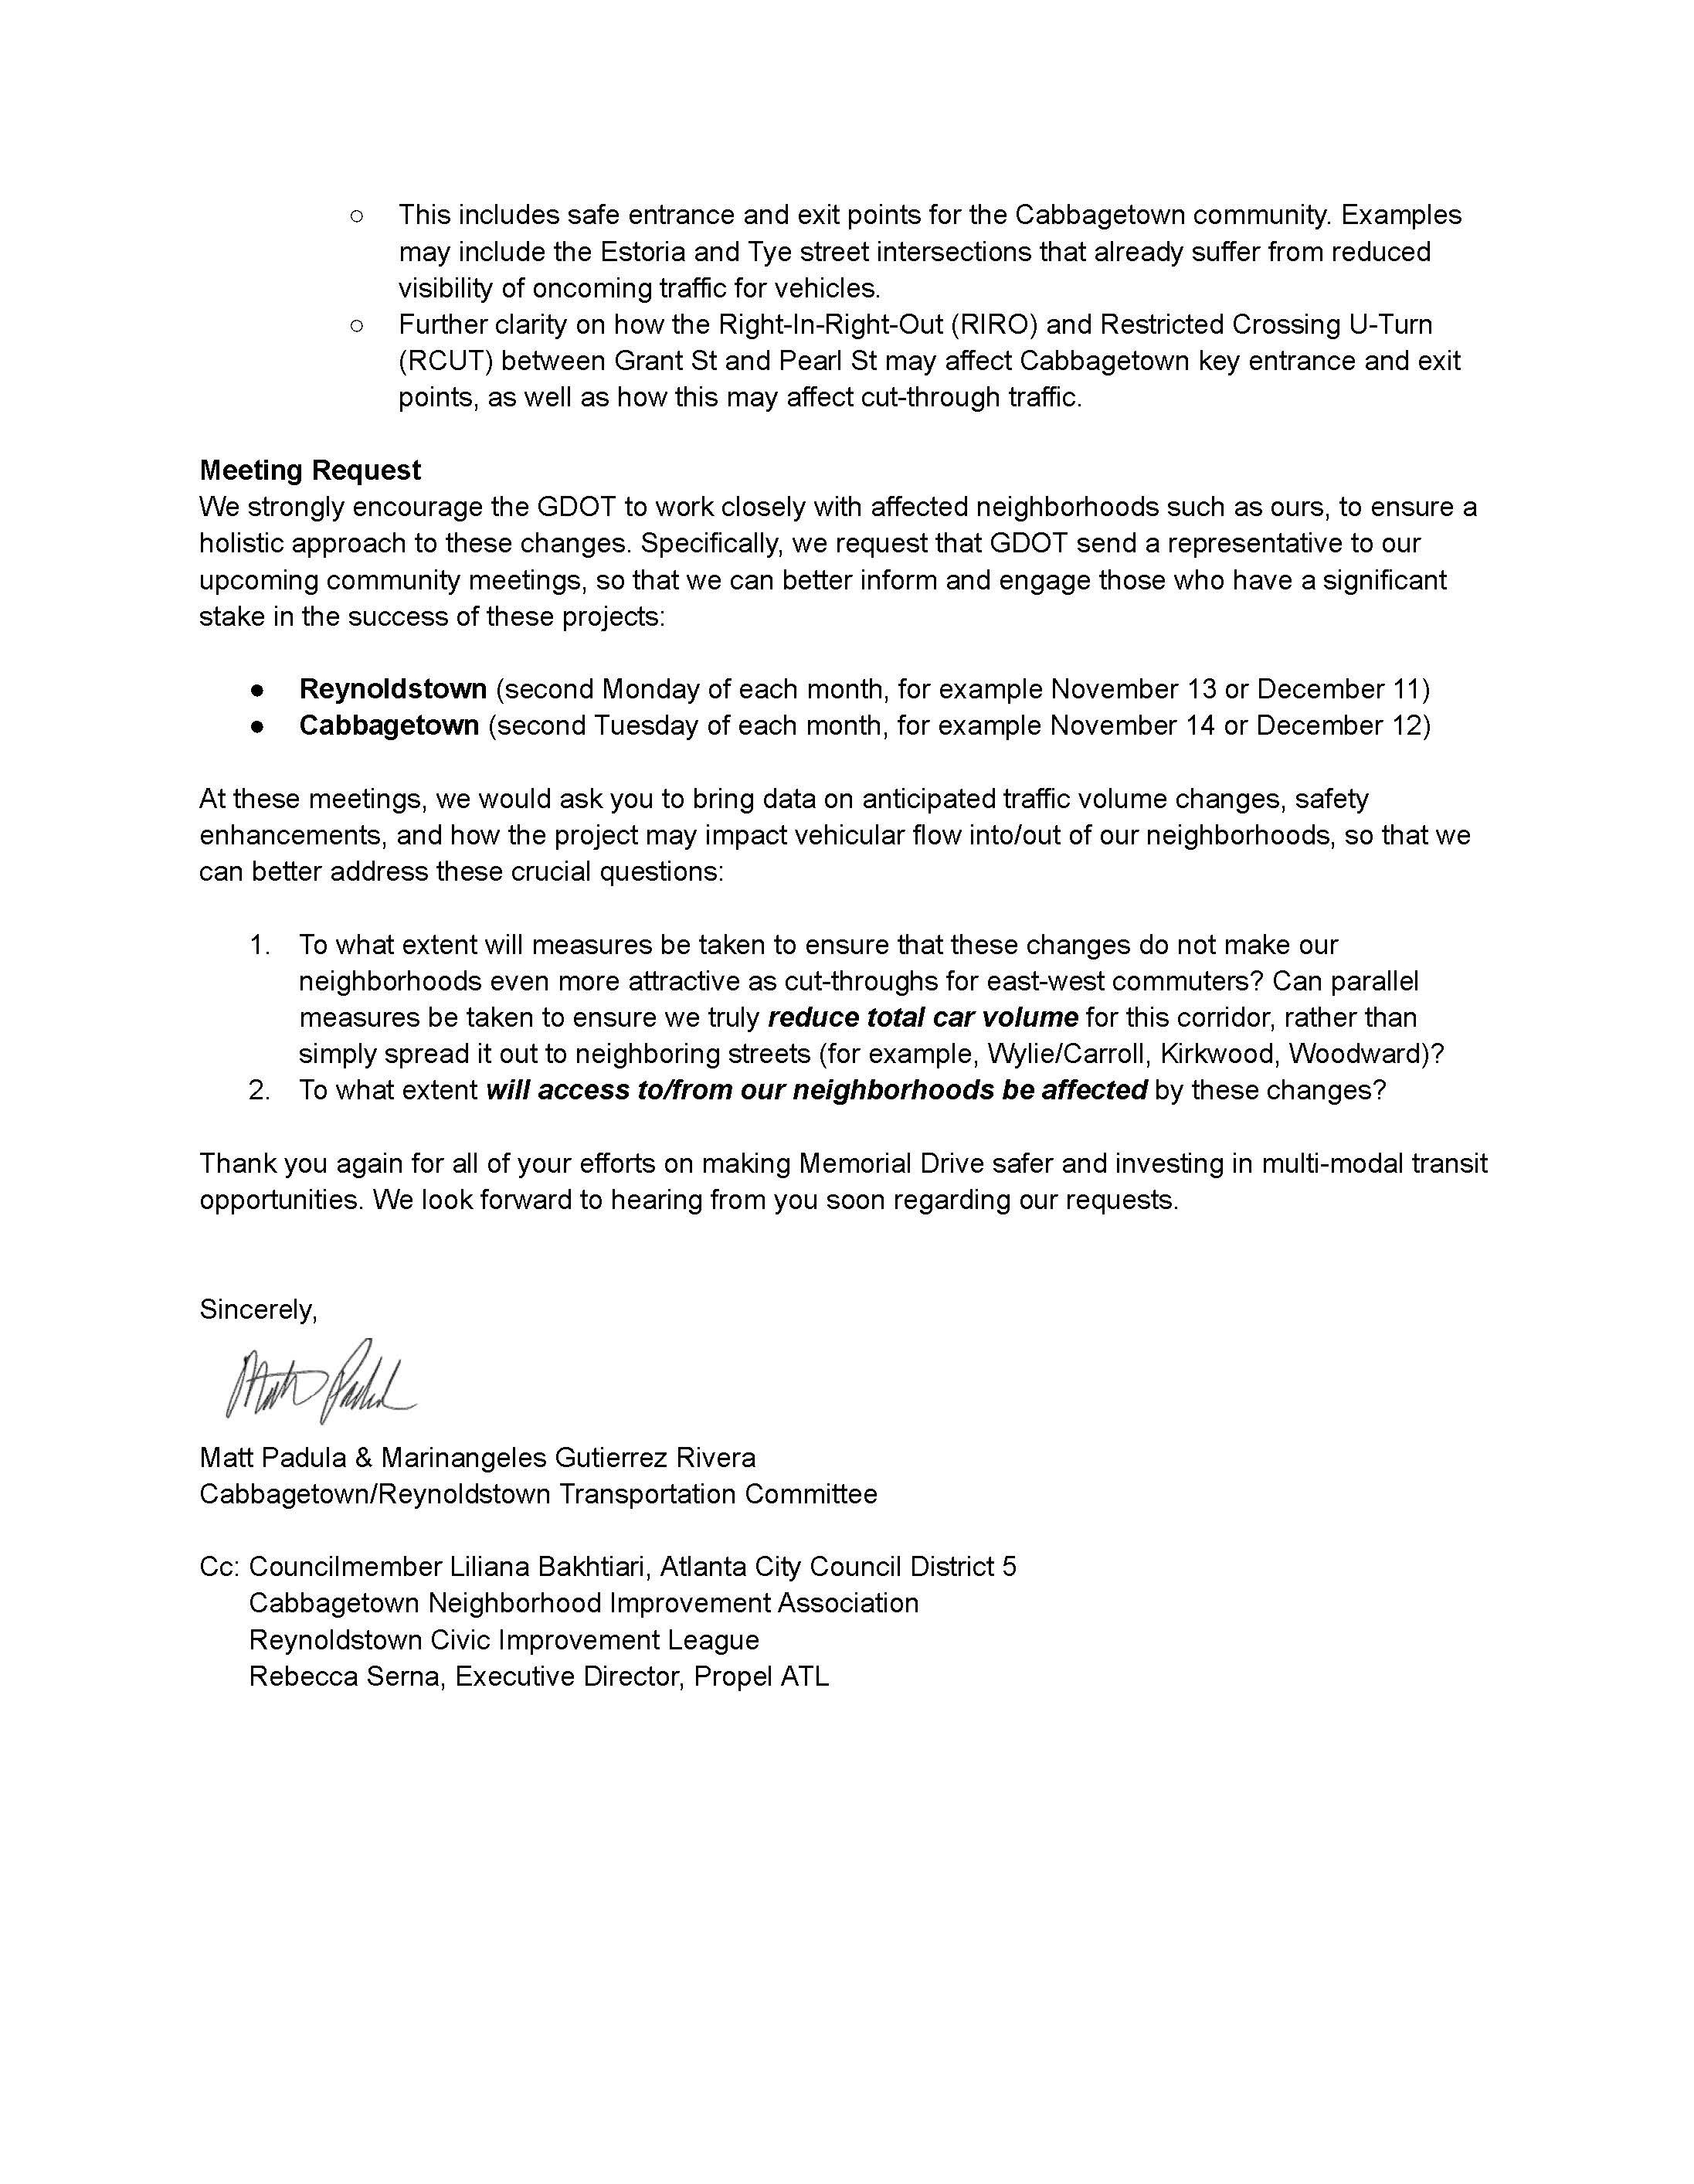 CRTC Letter of Support - Memorial Drive (2)_Page_2.jpg